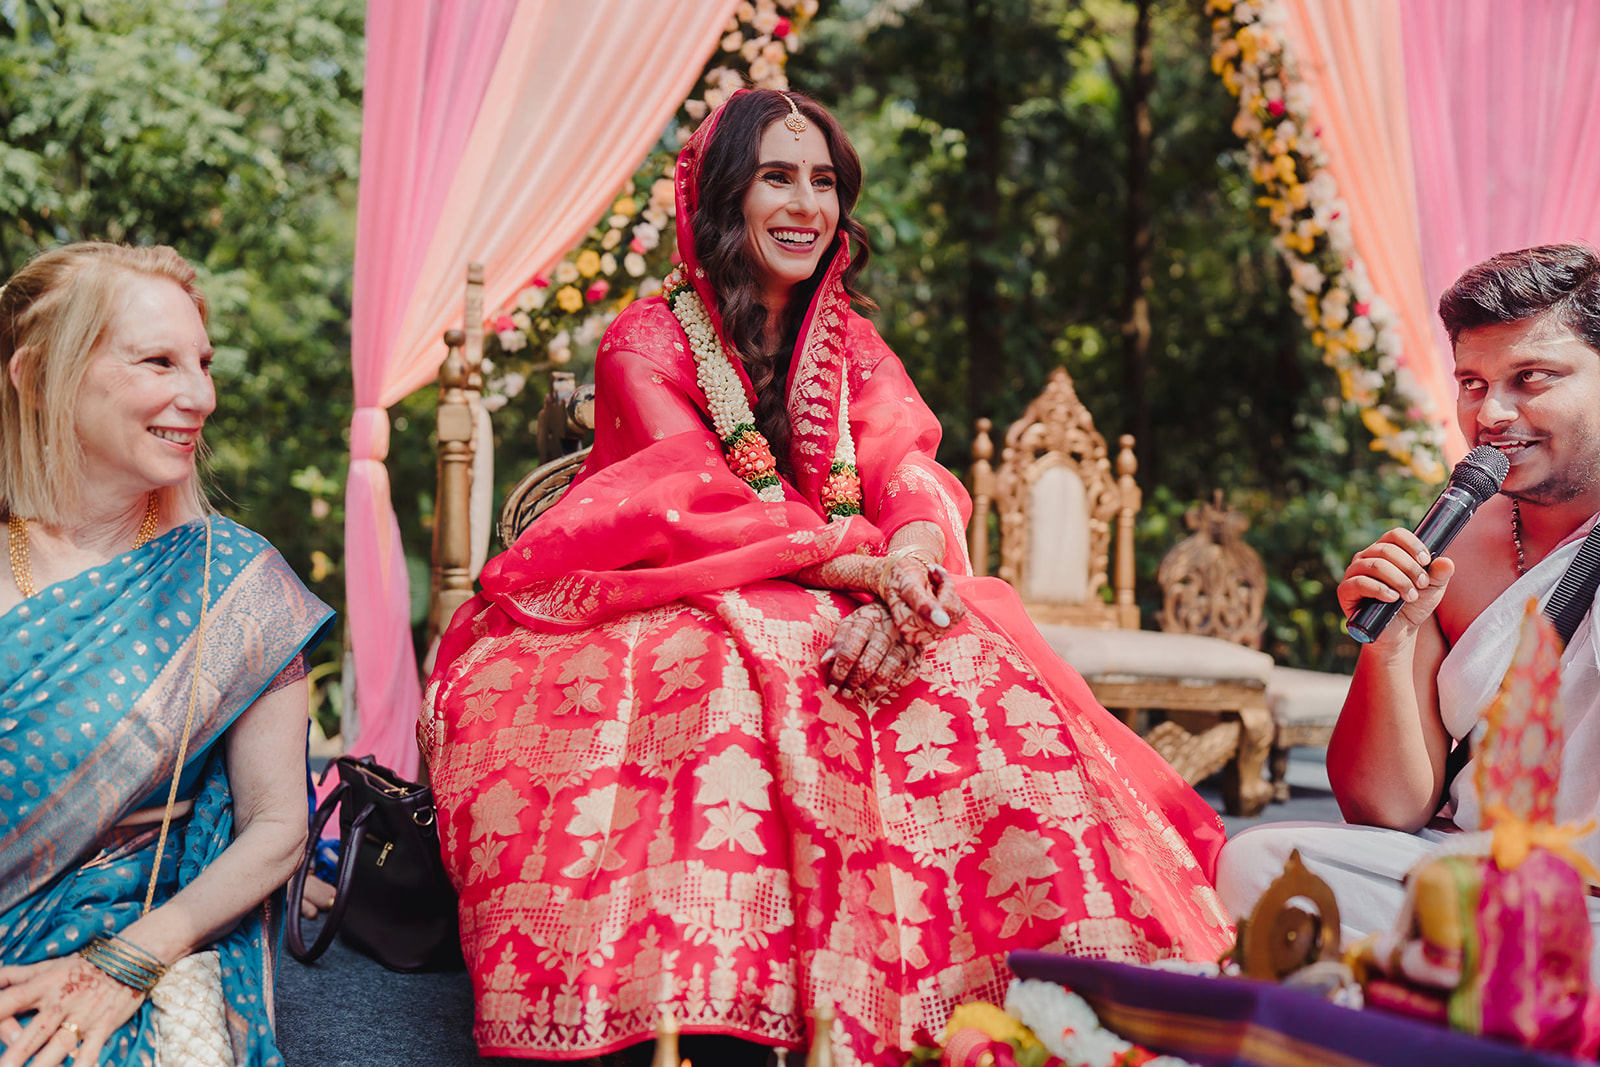 Bride captured in a candid moment while seated in the mandap